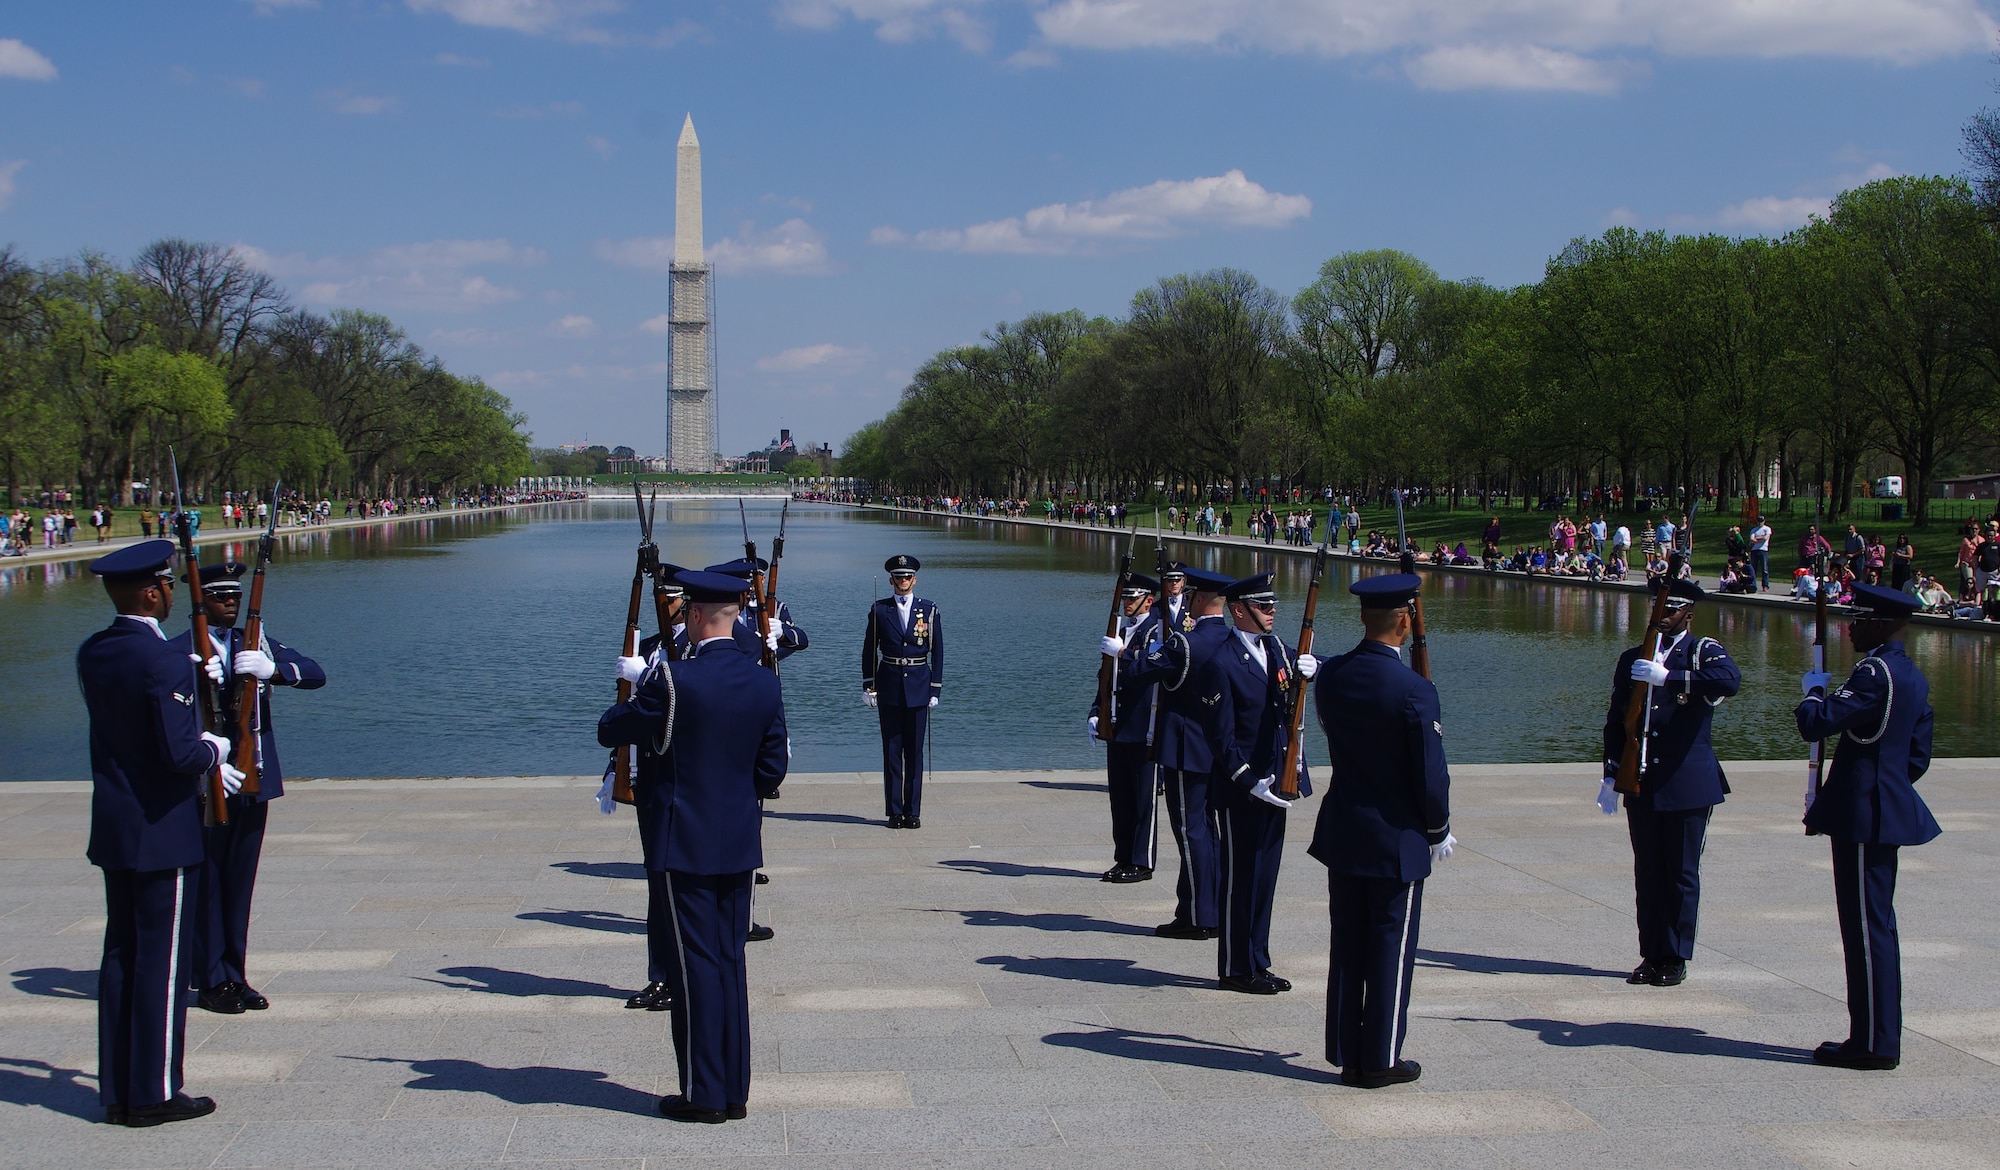 The U.S. Air Force Honor Guard Drill Team performs for visitors of the National Cherry Blossom Festival April 13, 2013 at the Lincoln Memorial in Washington, D.C. With every formation they perform the Airmen of the Drill Team try to represent the Air Force's core value of "excellence in all we do," by performing their drill movements to perfection. (U.S. Air Force photo/Airman 1st Class Alexander W. Riedel)